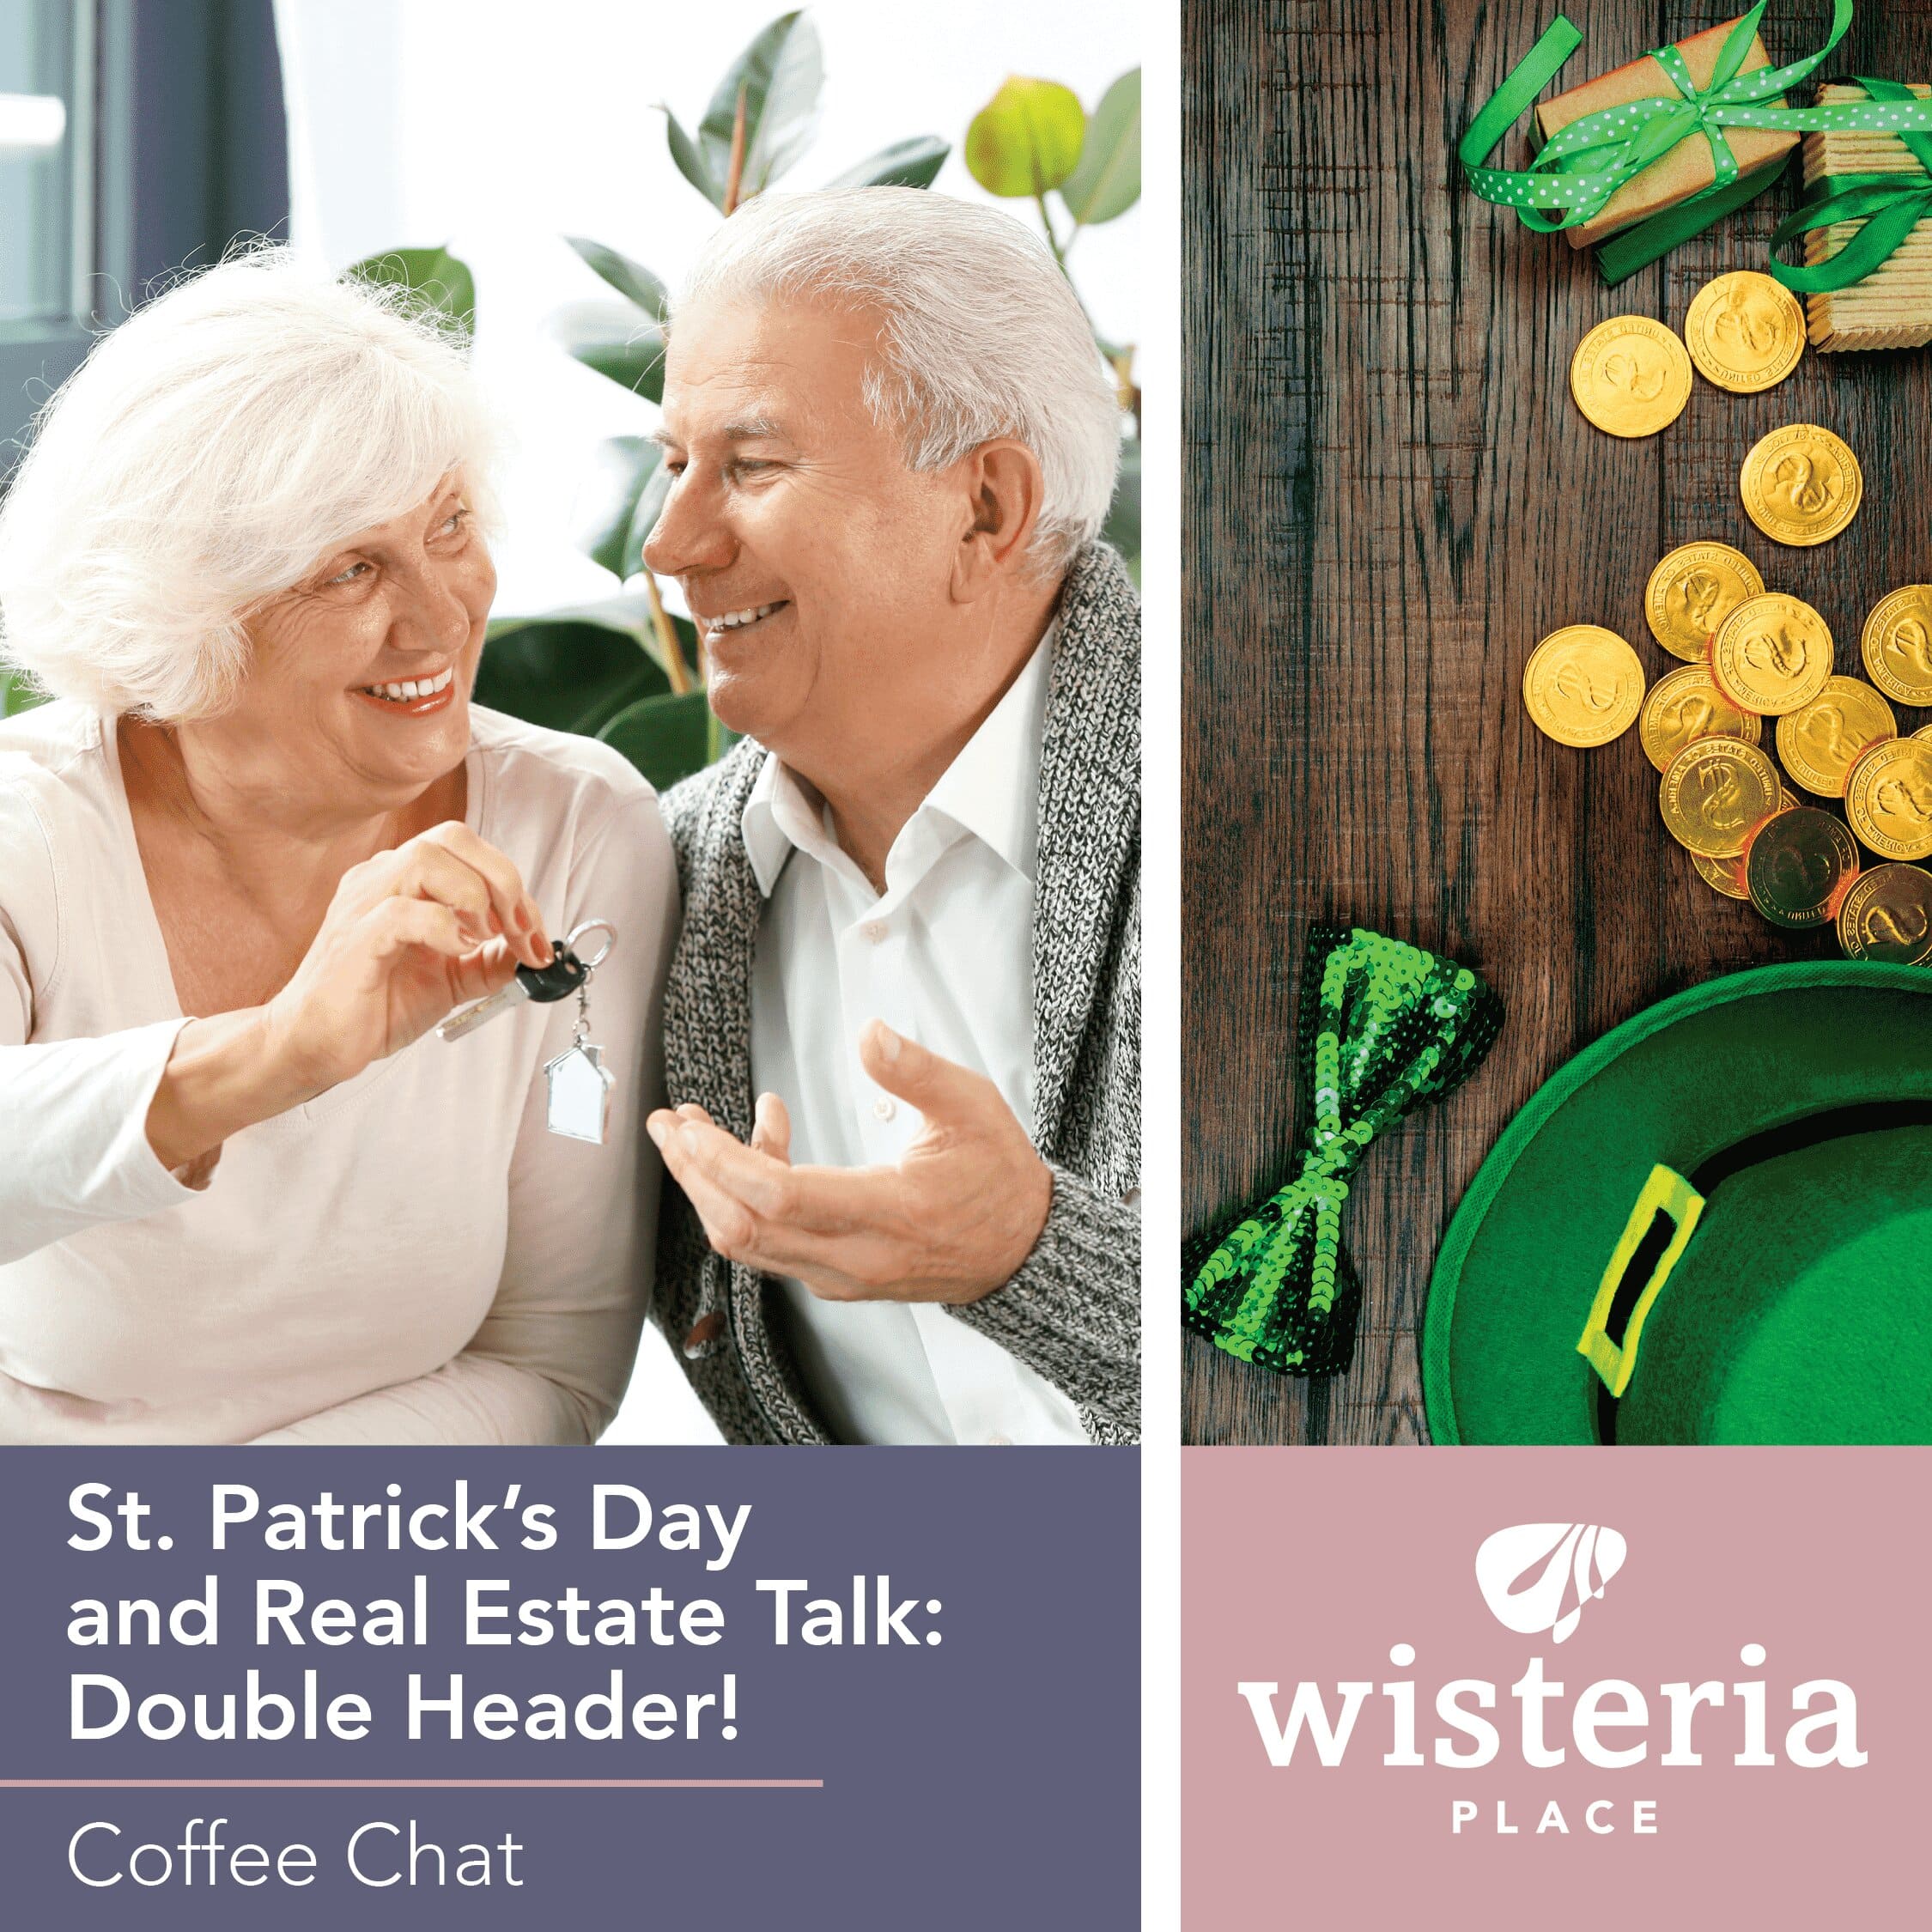 Happy St. Patrick's Day from our senior living community